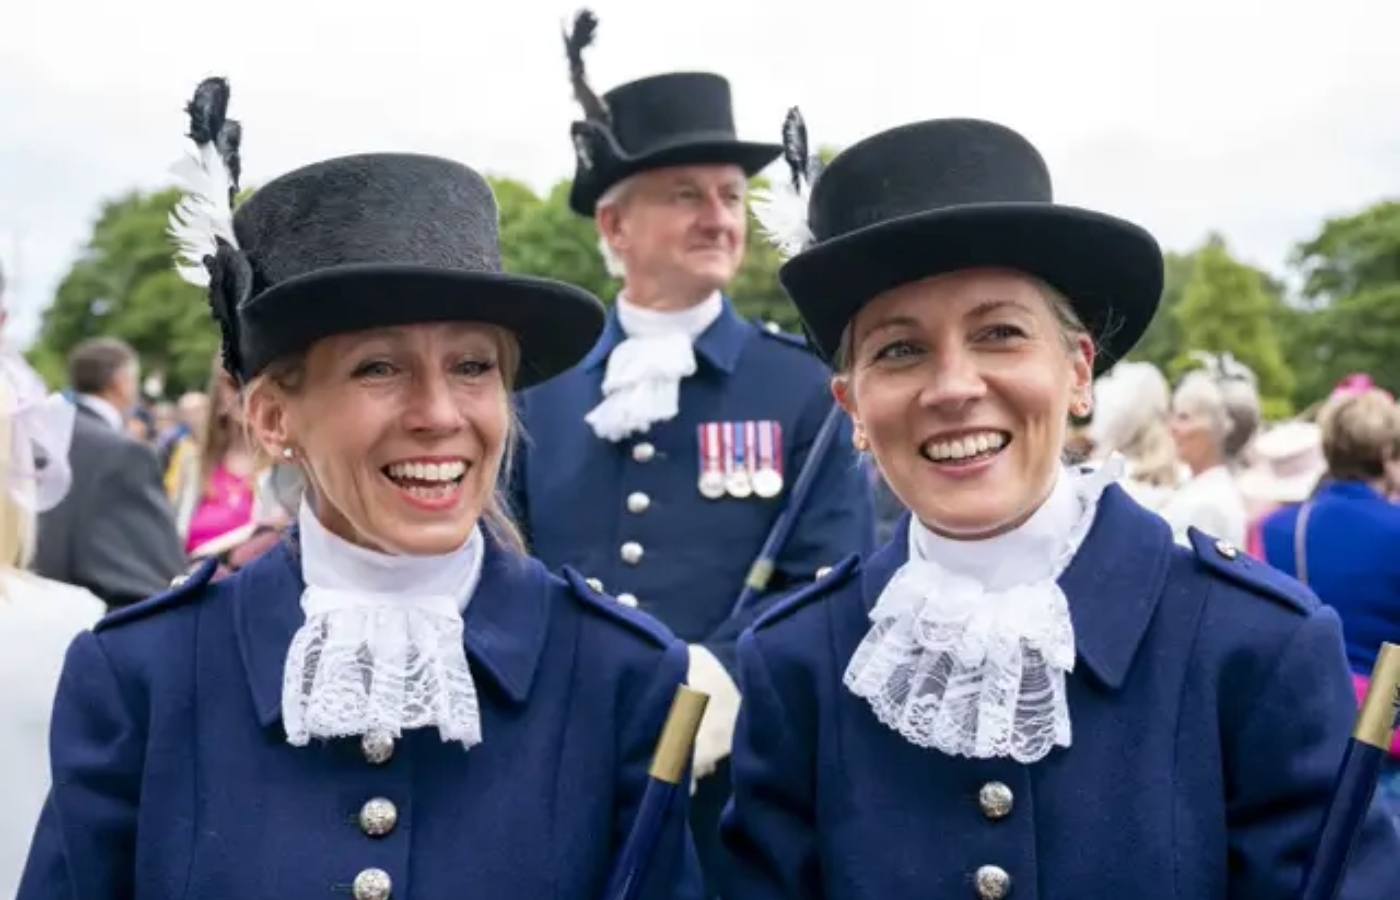 Belinda Hacking, left, and Victoria Webber are the first female High Constables.